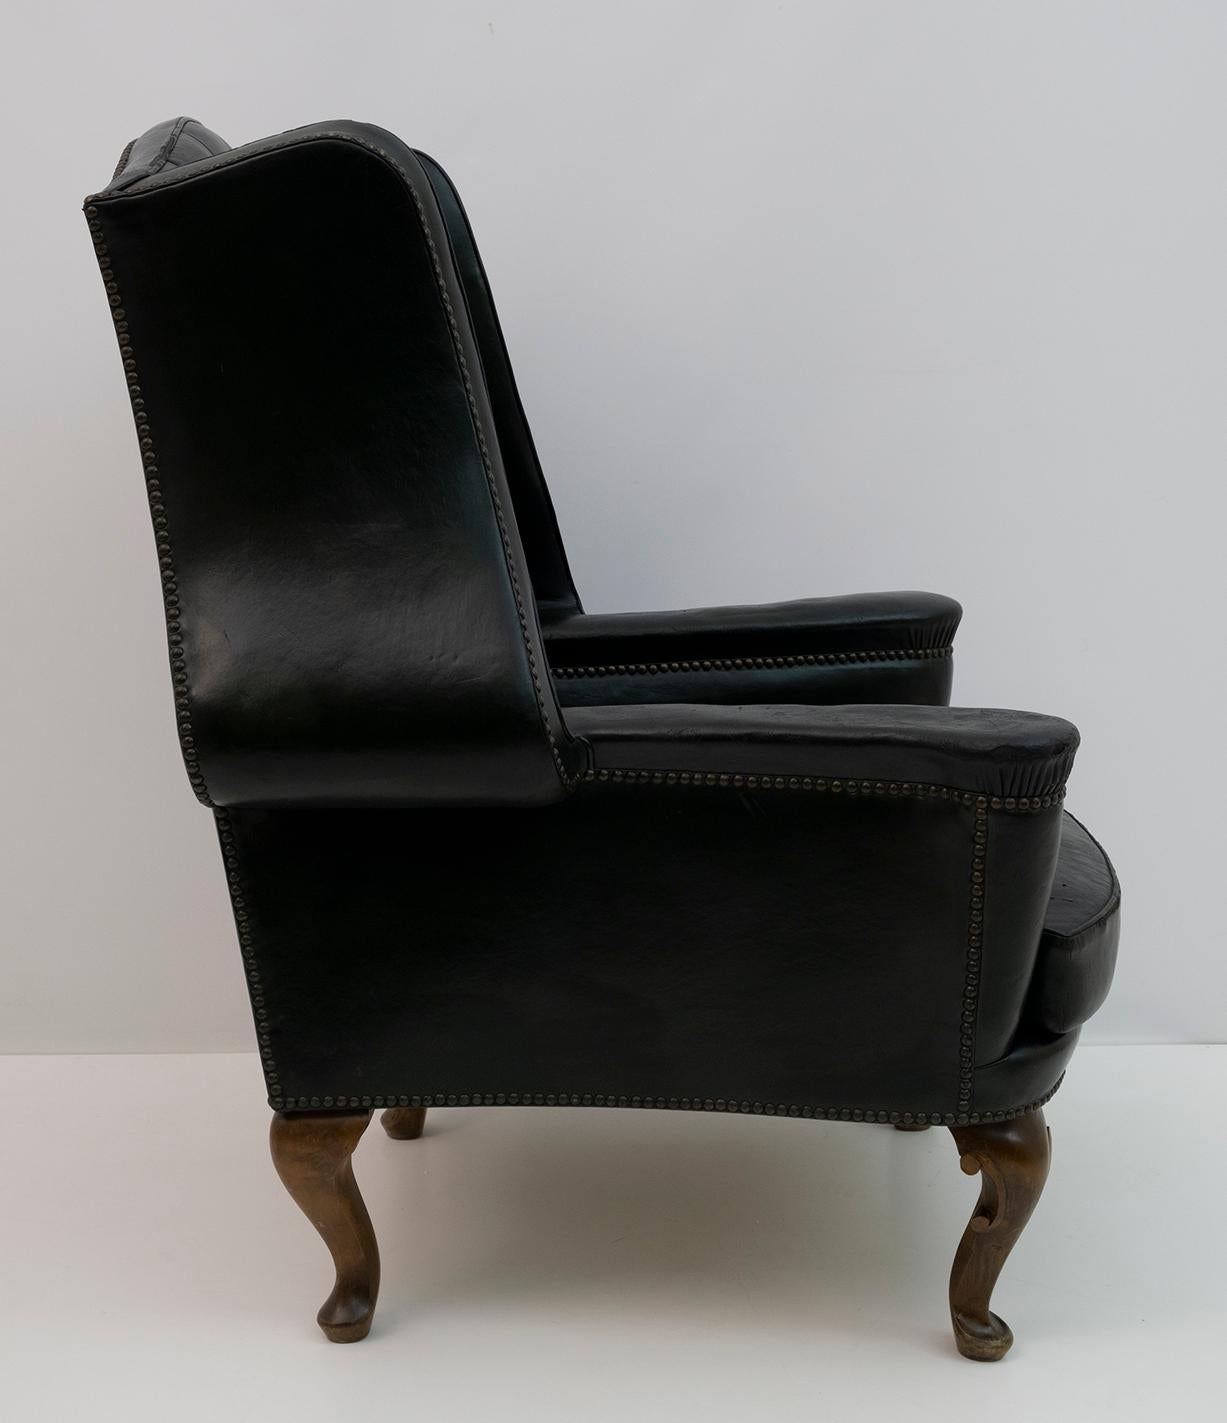 Hand-Crafted Georgian Style Rare Original Chesterfield Leather Armchair, 1950s For Sale